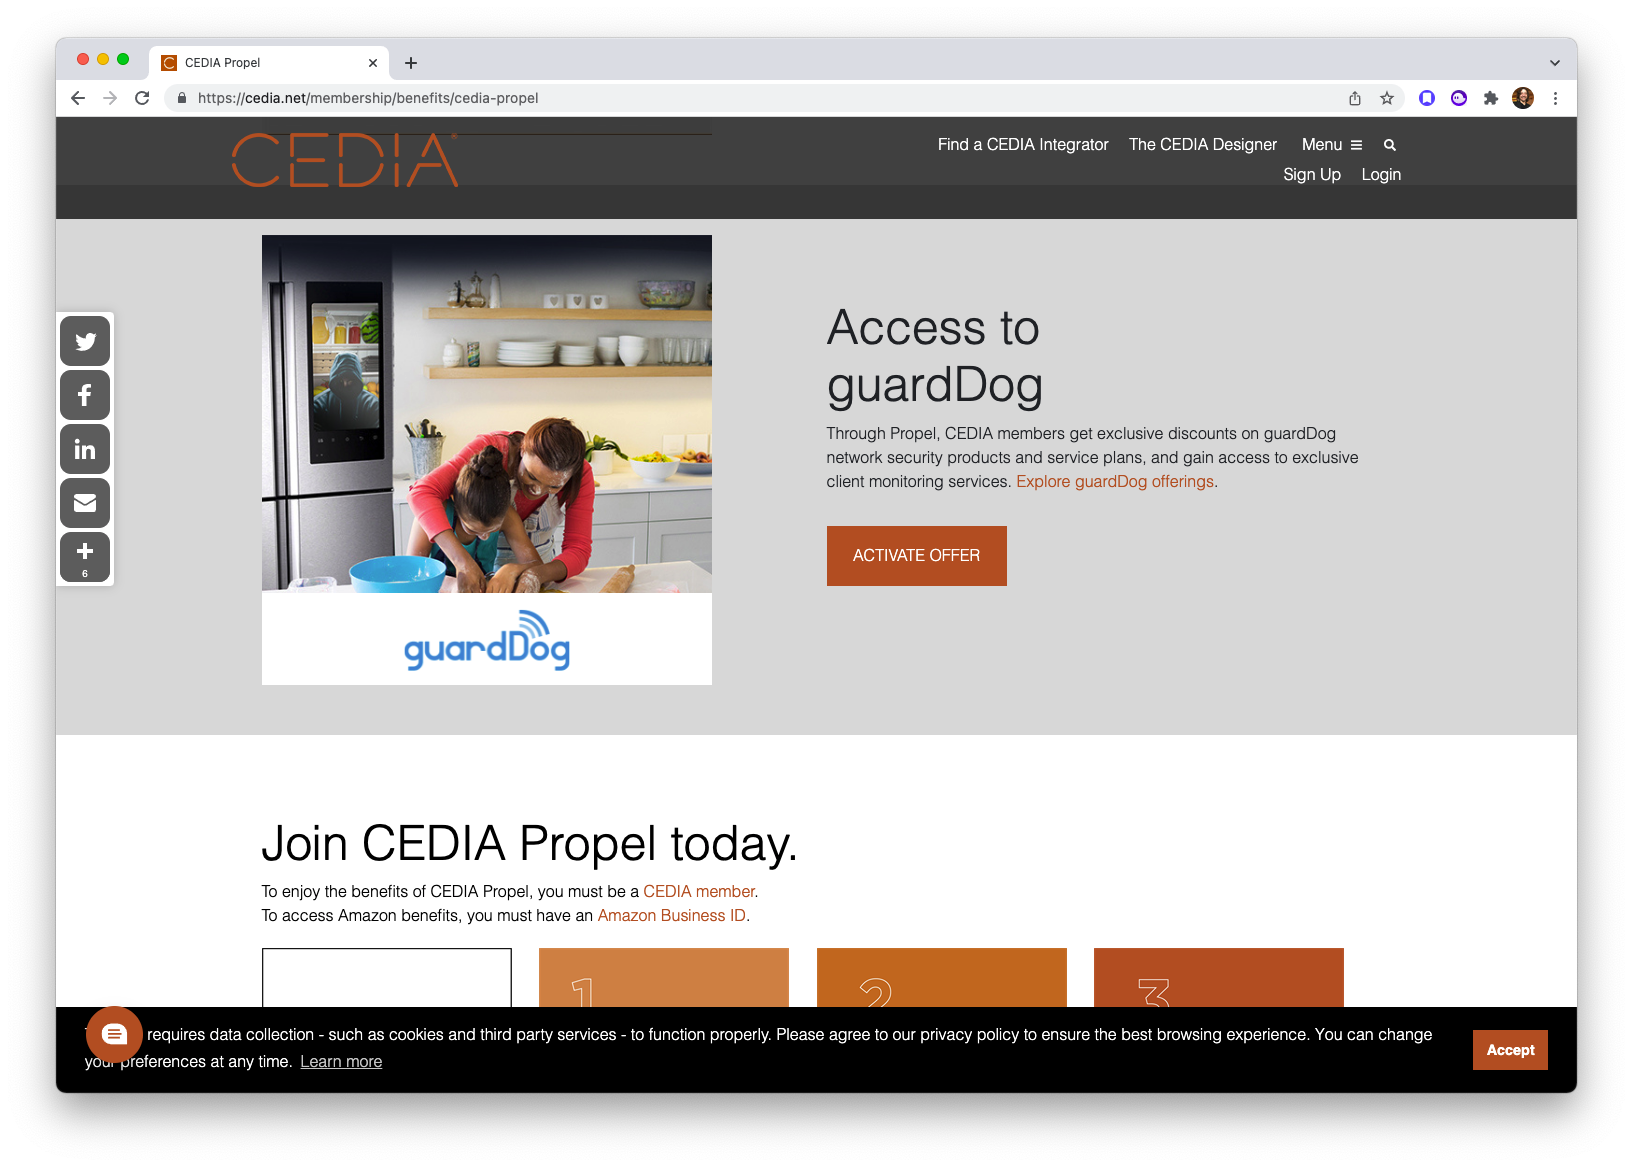 Cybersecurity Provider guardDog.ai Joins CEDIA Propel, Offering Exclusive Discounts on Products and Services for CEDIA Members